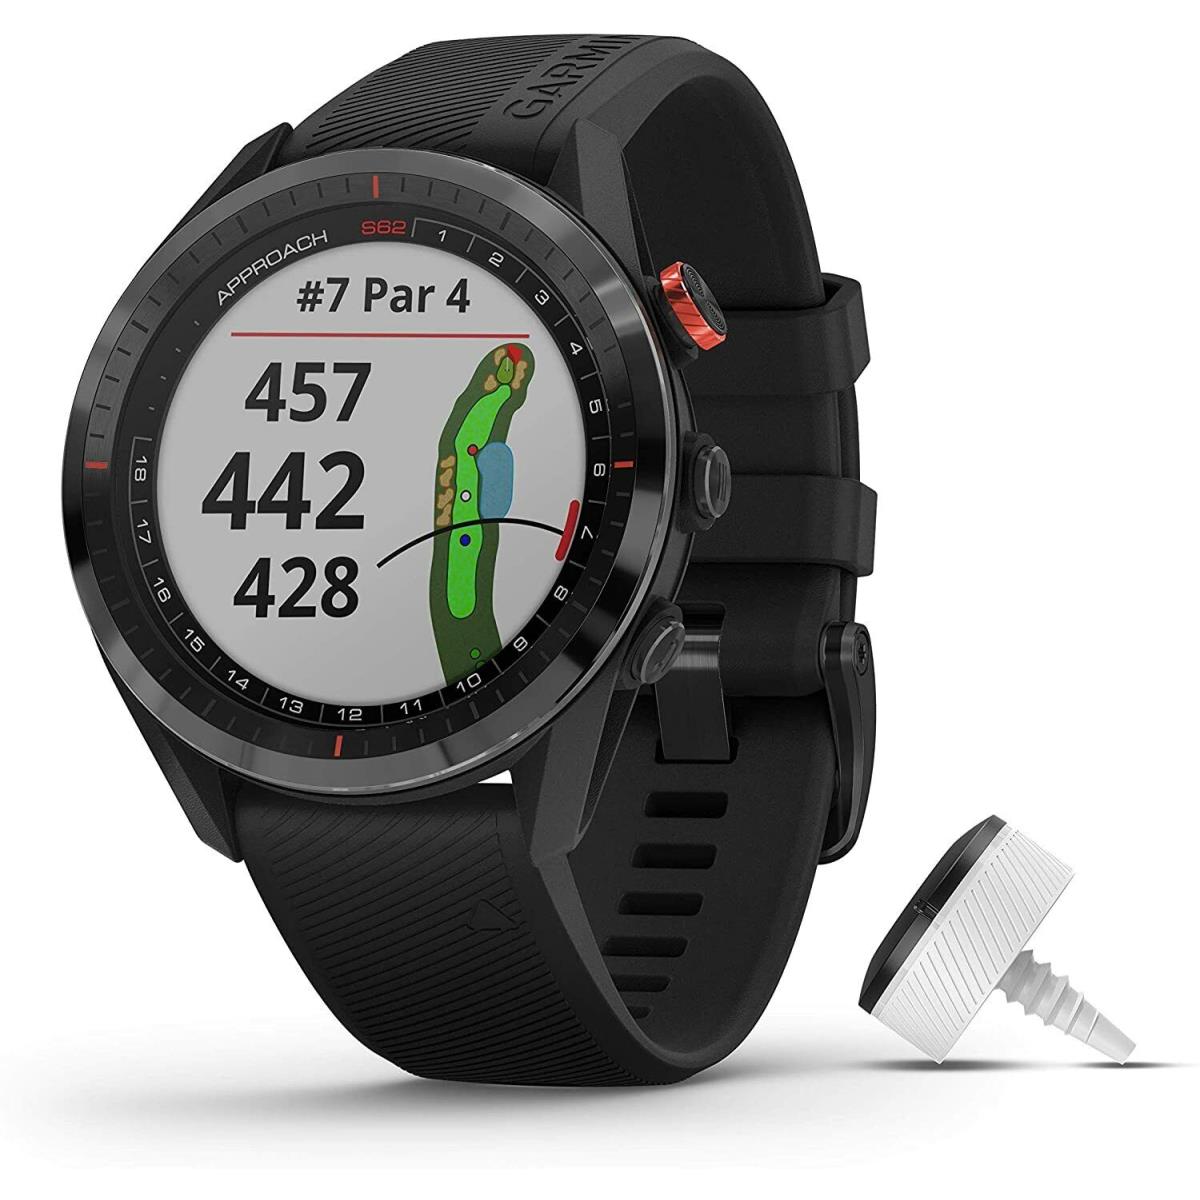 Garmin Approach S62 Bundle Premium Golf Gps Watch Mapping and Full Color Screen